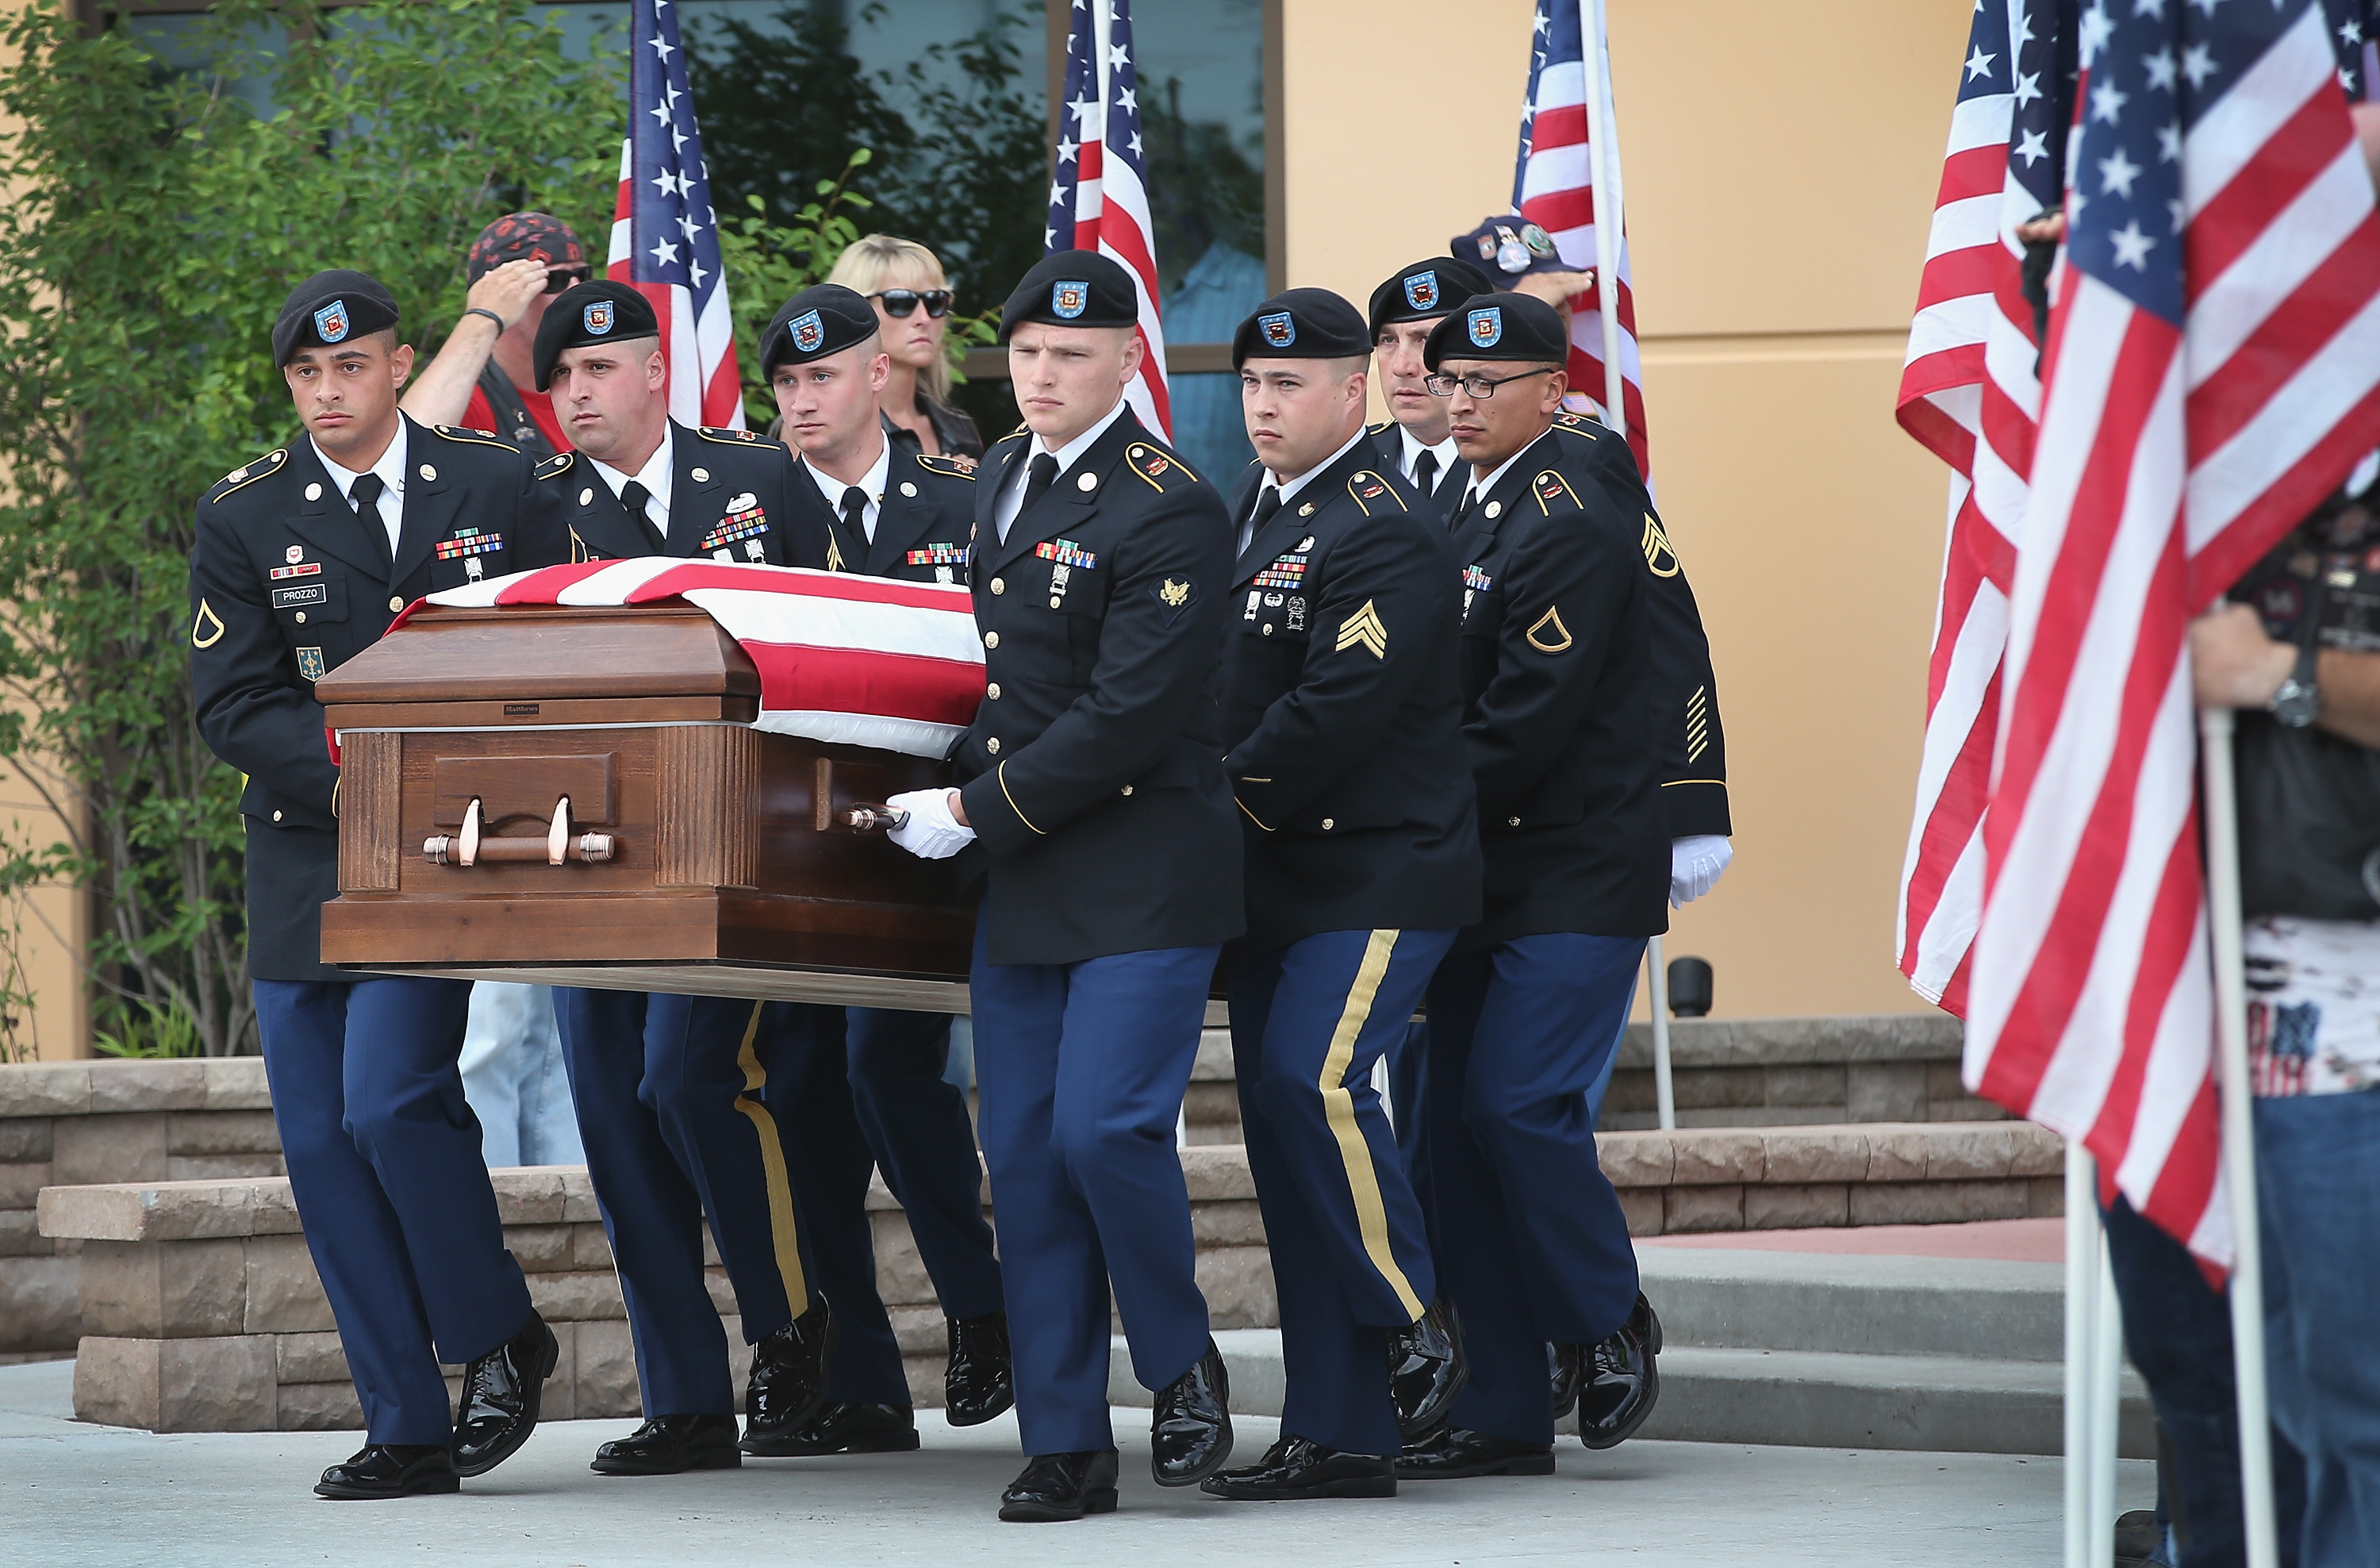 Soldiers carry the casket of U.S. Army Pfc. Aaron Toppen from Parkview Christian Church following his funeral service on June 24, 2014 in Mokena, Ill. (Scott Olson—Getty Images)